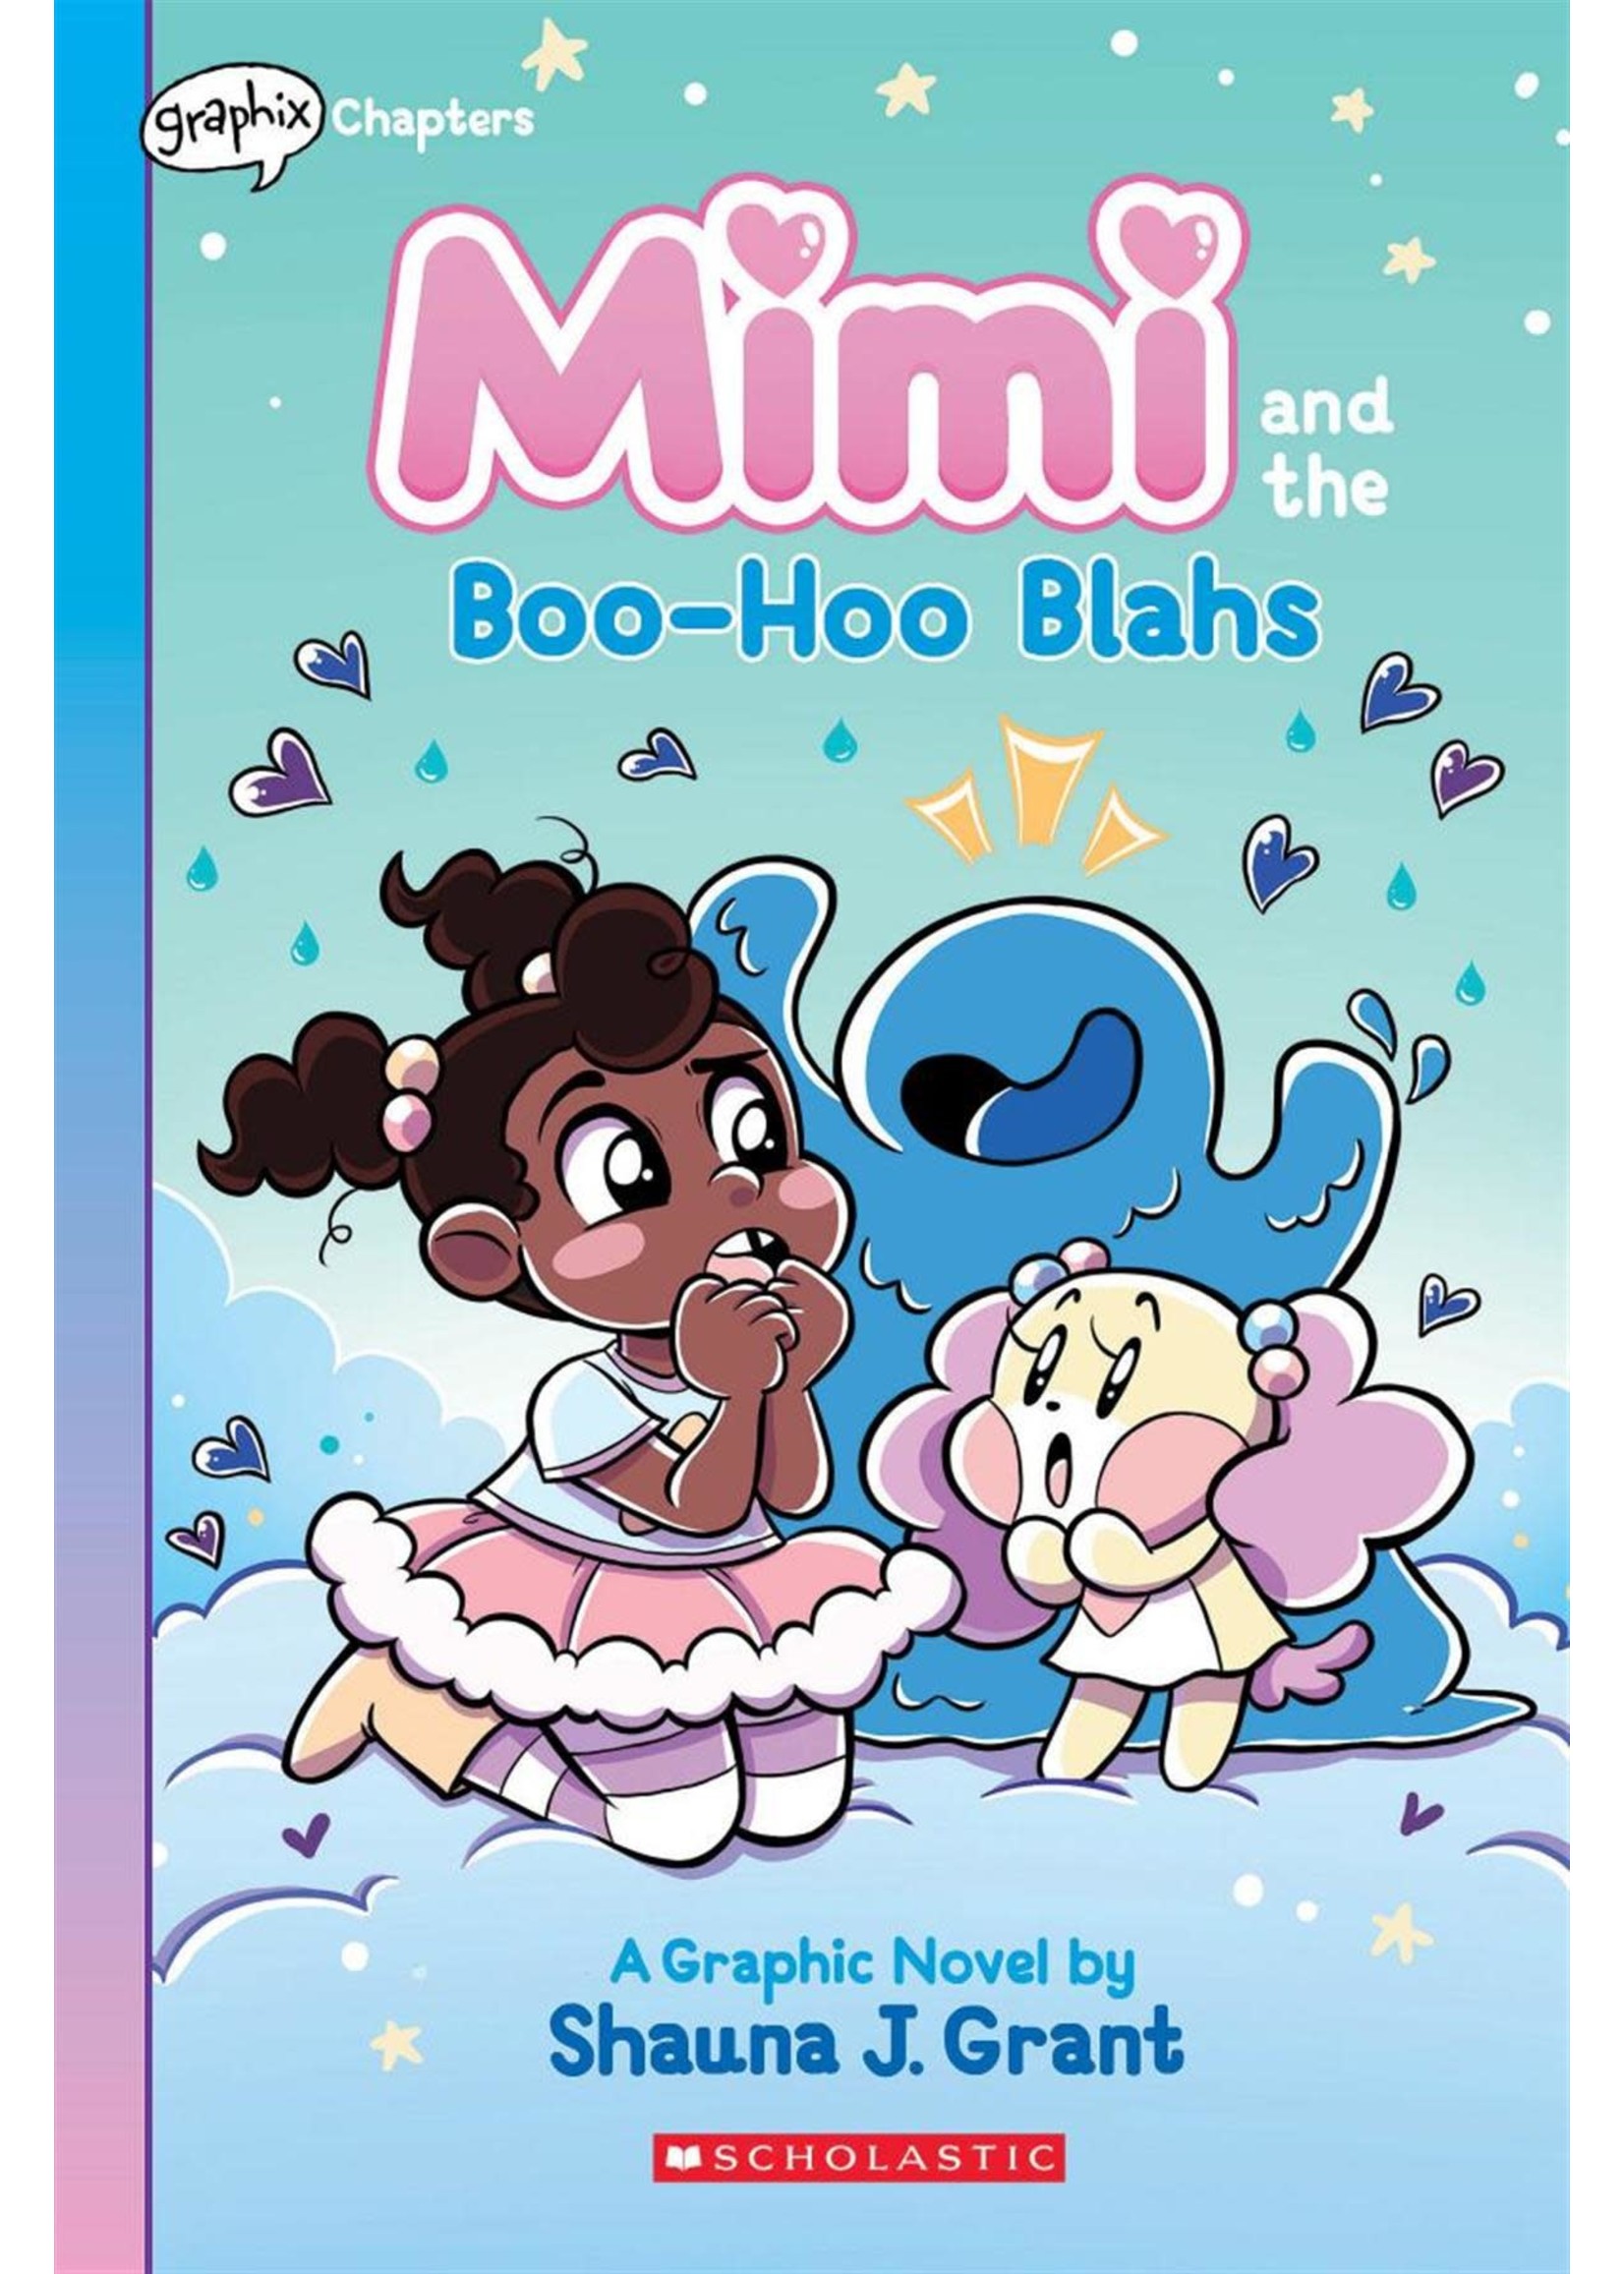 Mimi and the Boo-Hoo Blahs: A Graphix Chapters Book (Mimi #2) by Shauna J. Grant